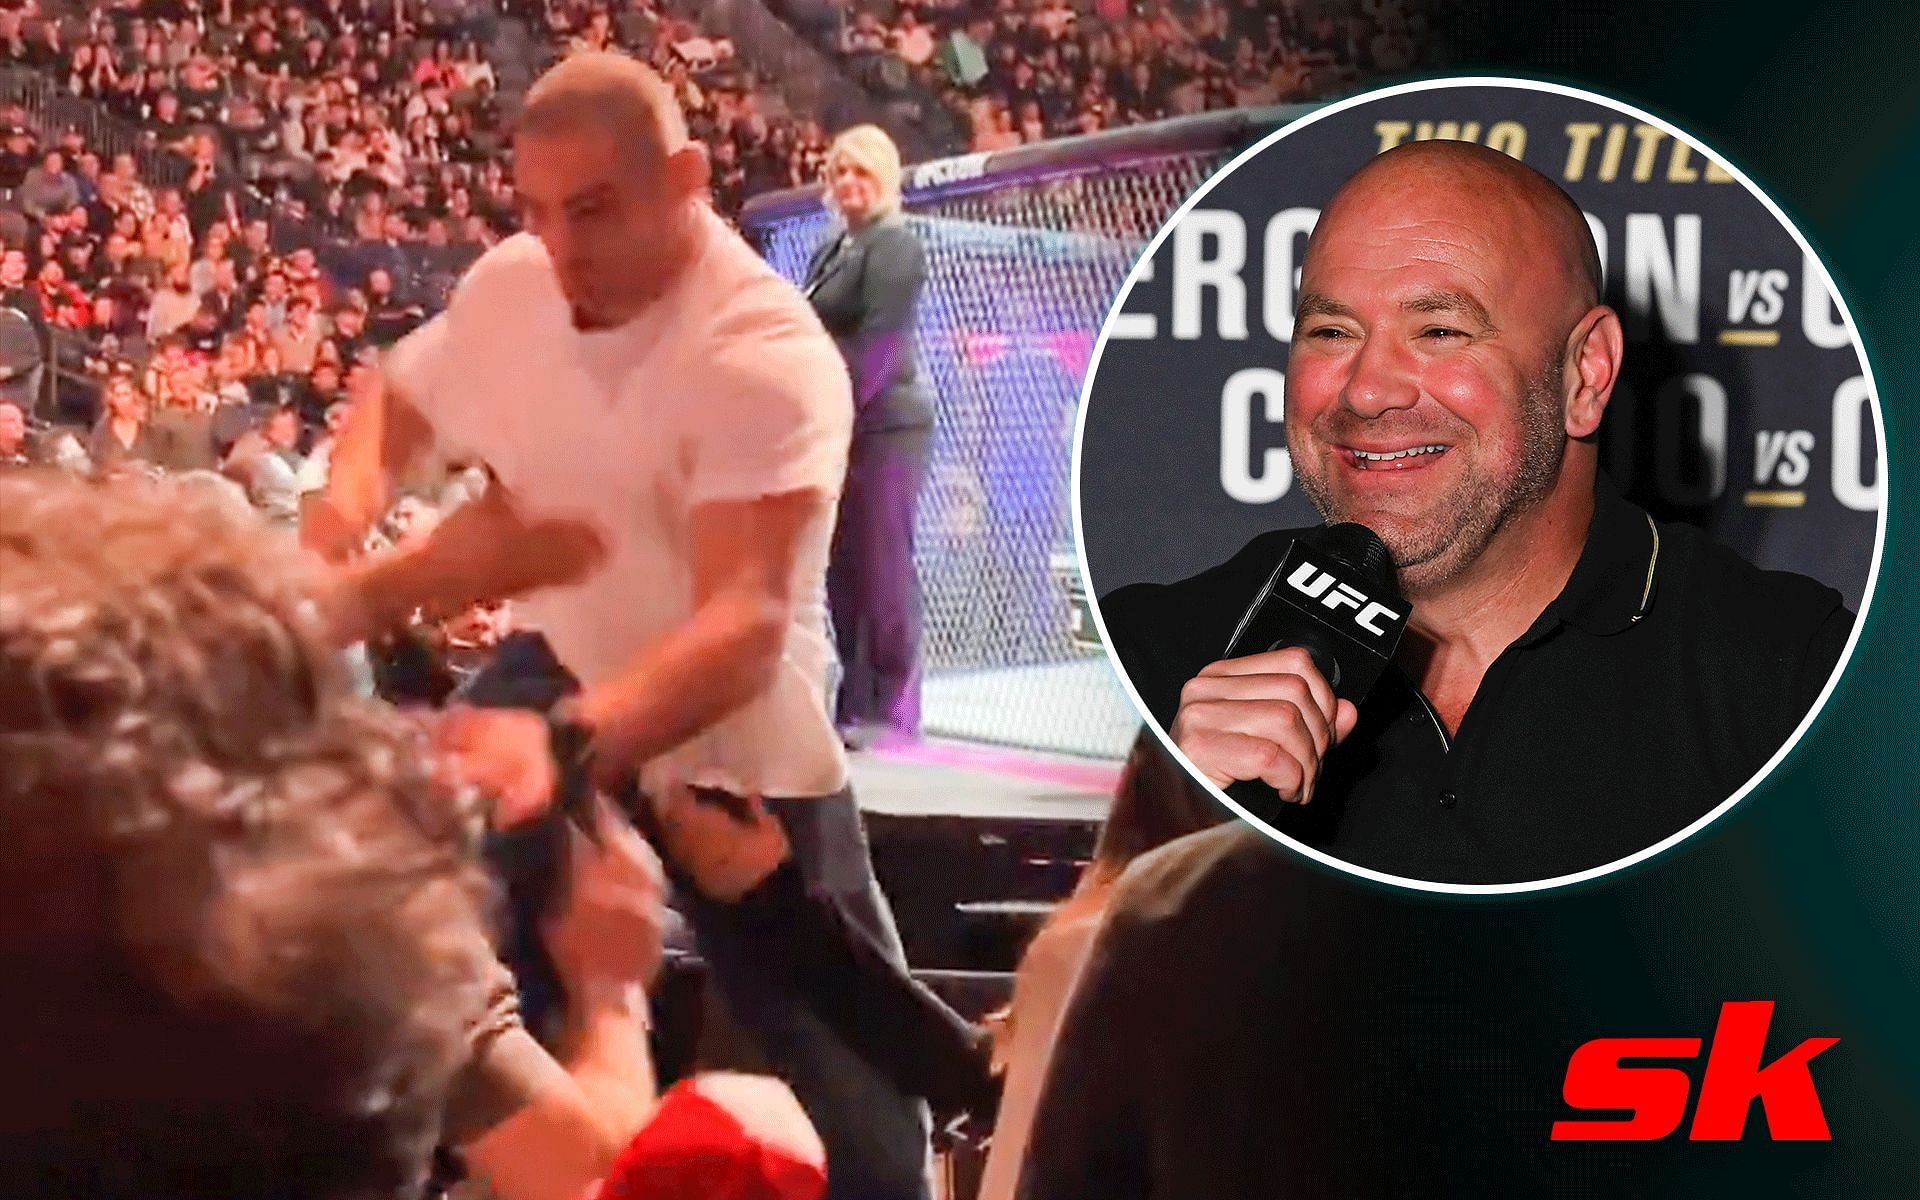 Dana White (right) reveals the name of the person responsible for Sean Strickland- Dricus Du Plessis brawl (left) (Images Courtesy: @TruthfulUfcFan and Getty Images)